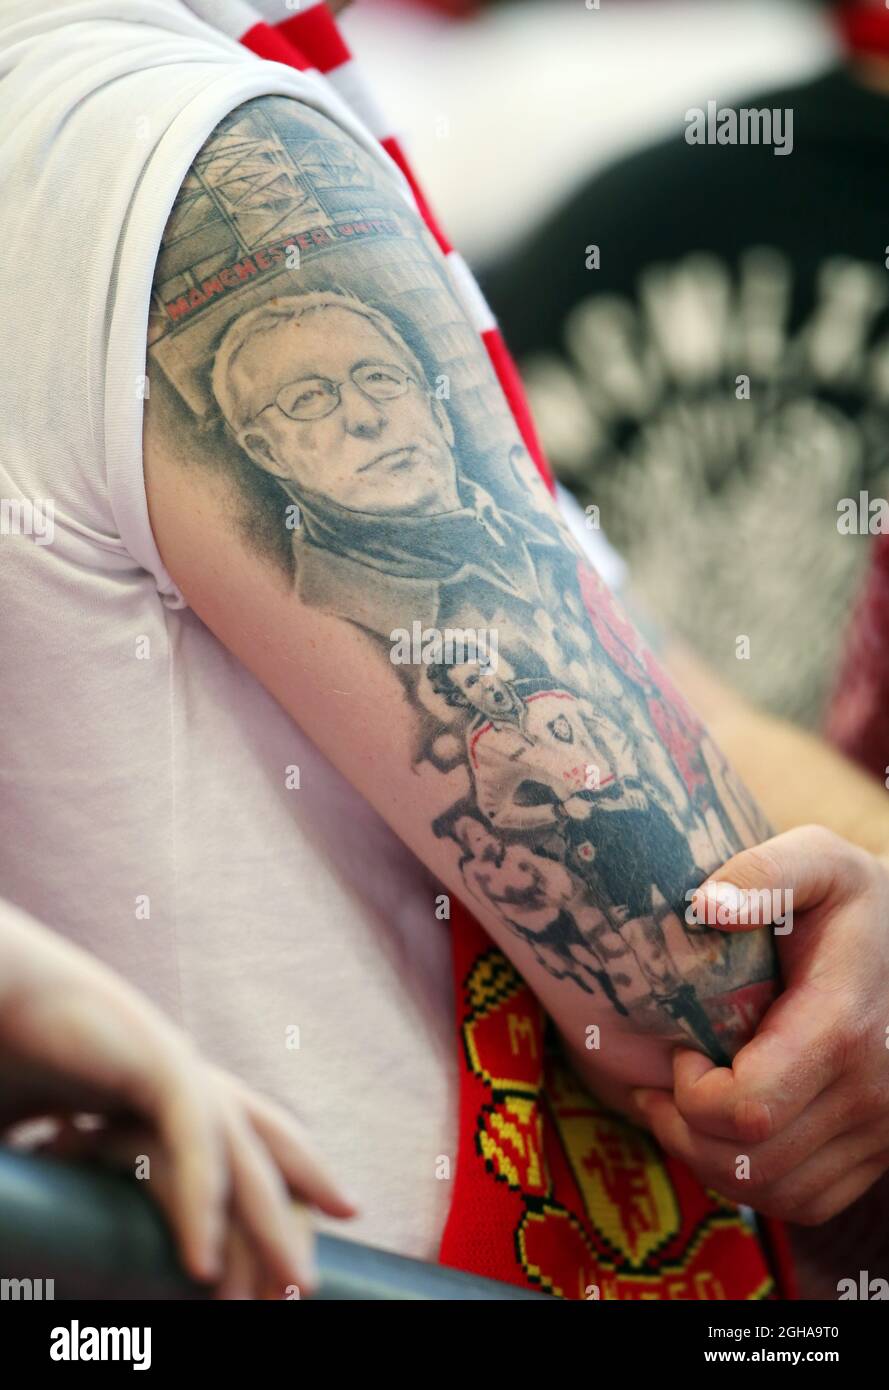 A Manchester United fan shows off his tattoos during the FA Community  Shield match at Wembley Stadium, London. Picture date August 7th, 2016 Pic  David Klein/Sportimage via PA Images Stock Photo -